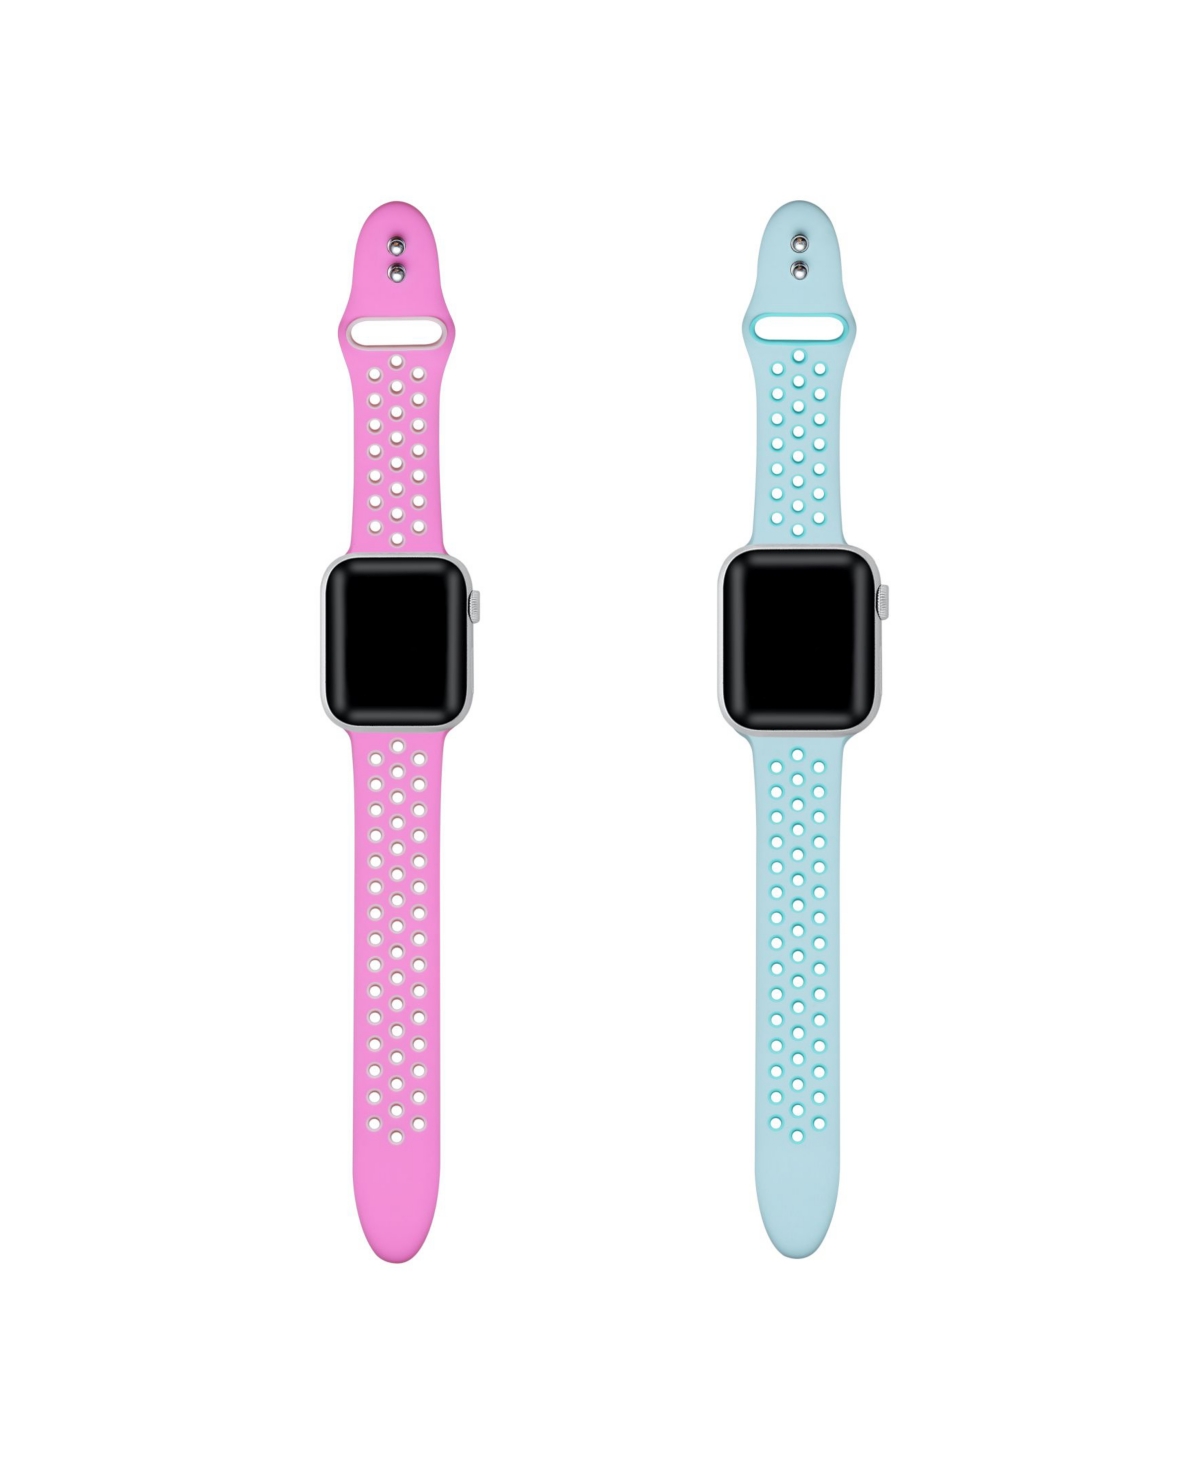 Posh Tech Breathable Sport 2-Pack Mint and Pink Silicone Bands for Apple Watch, 42mm-44mm